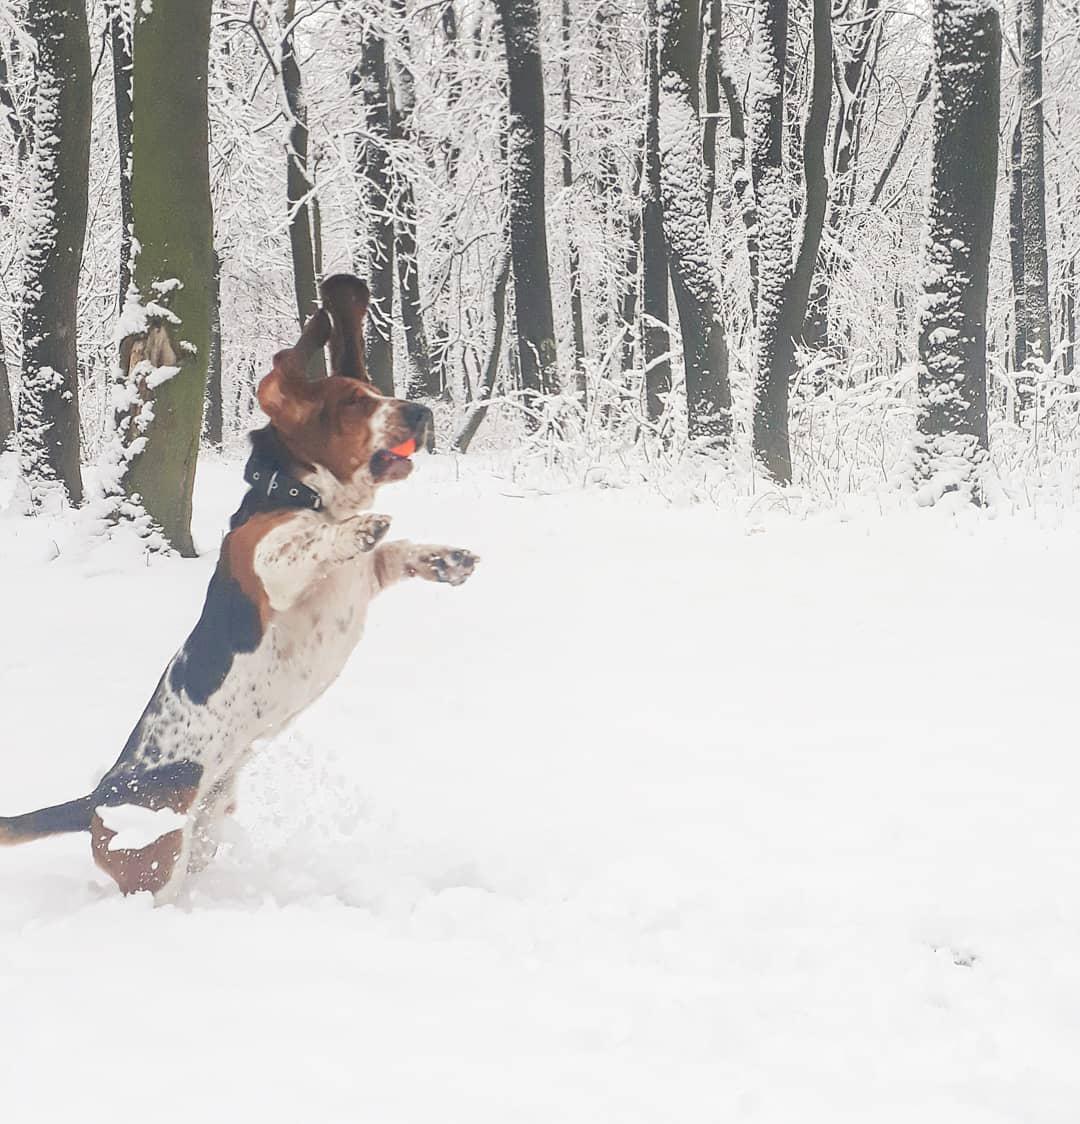 A Basset Hound catching a ball in the forest during snow